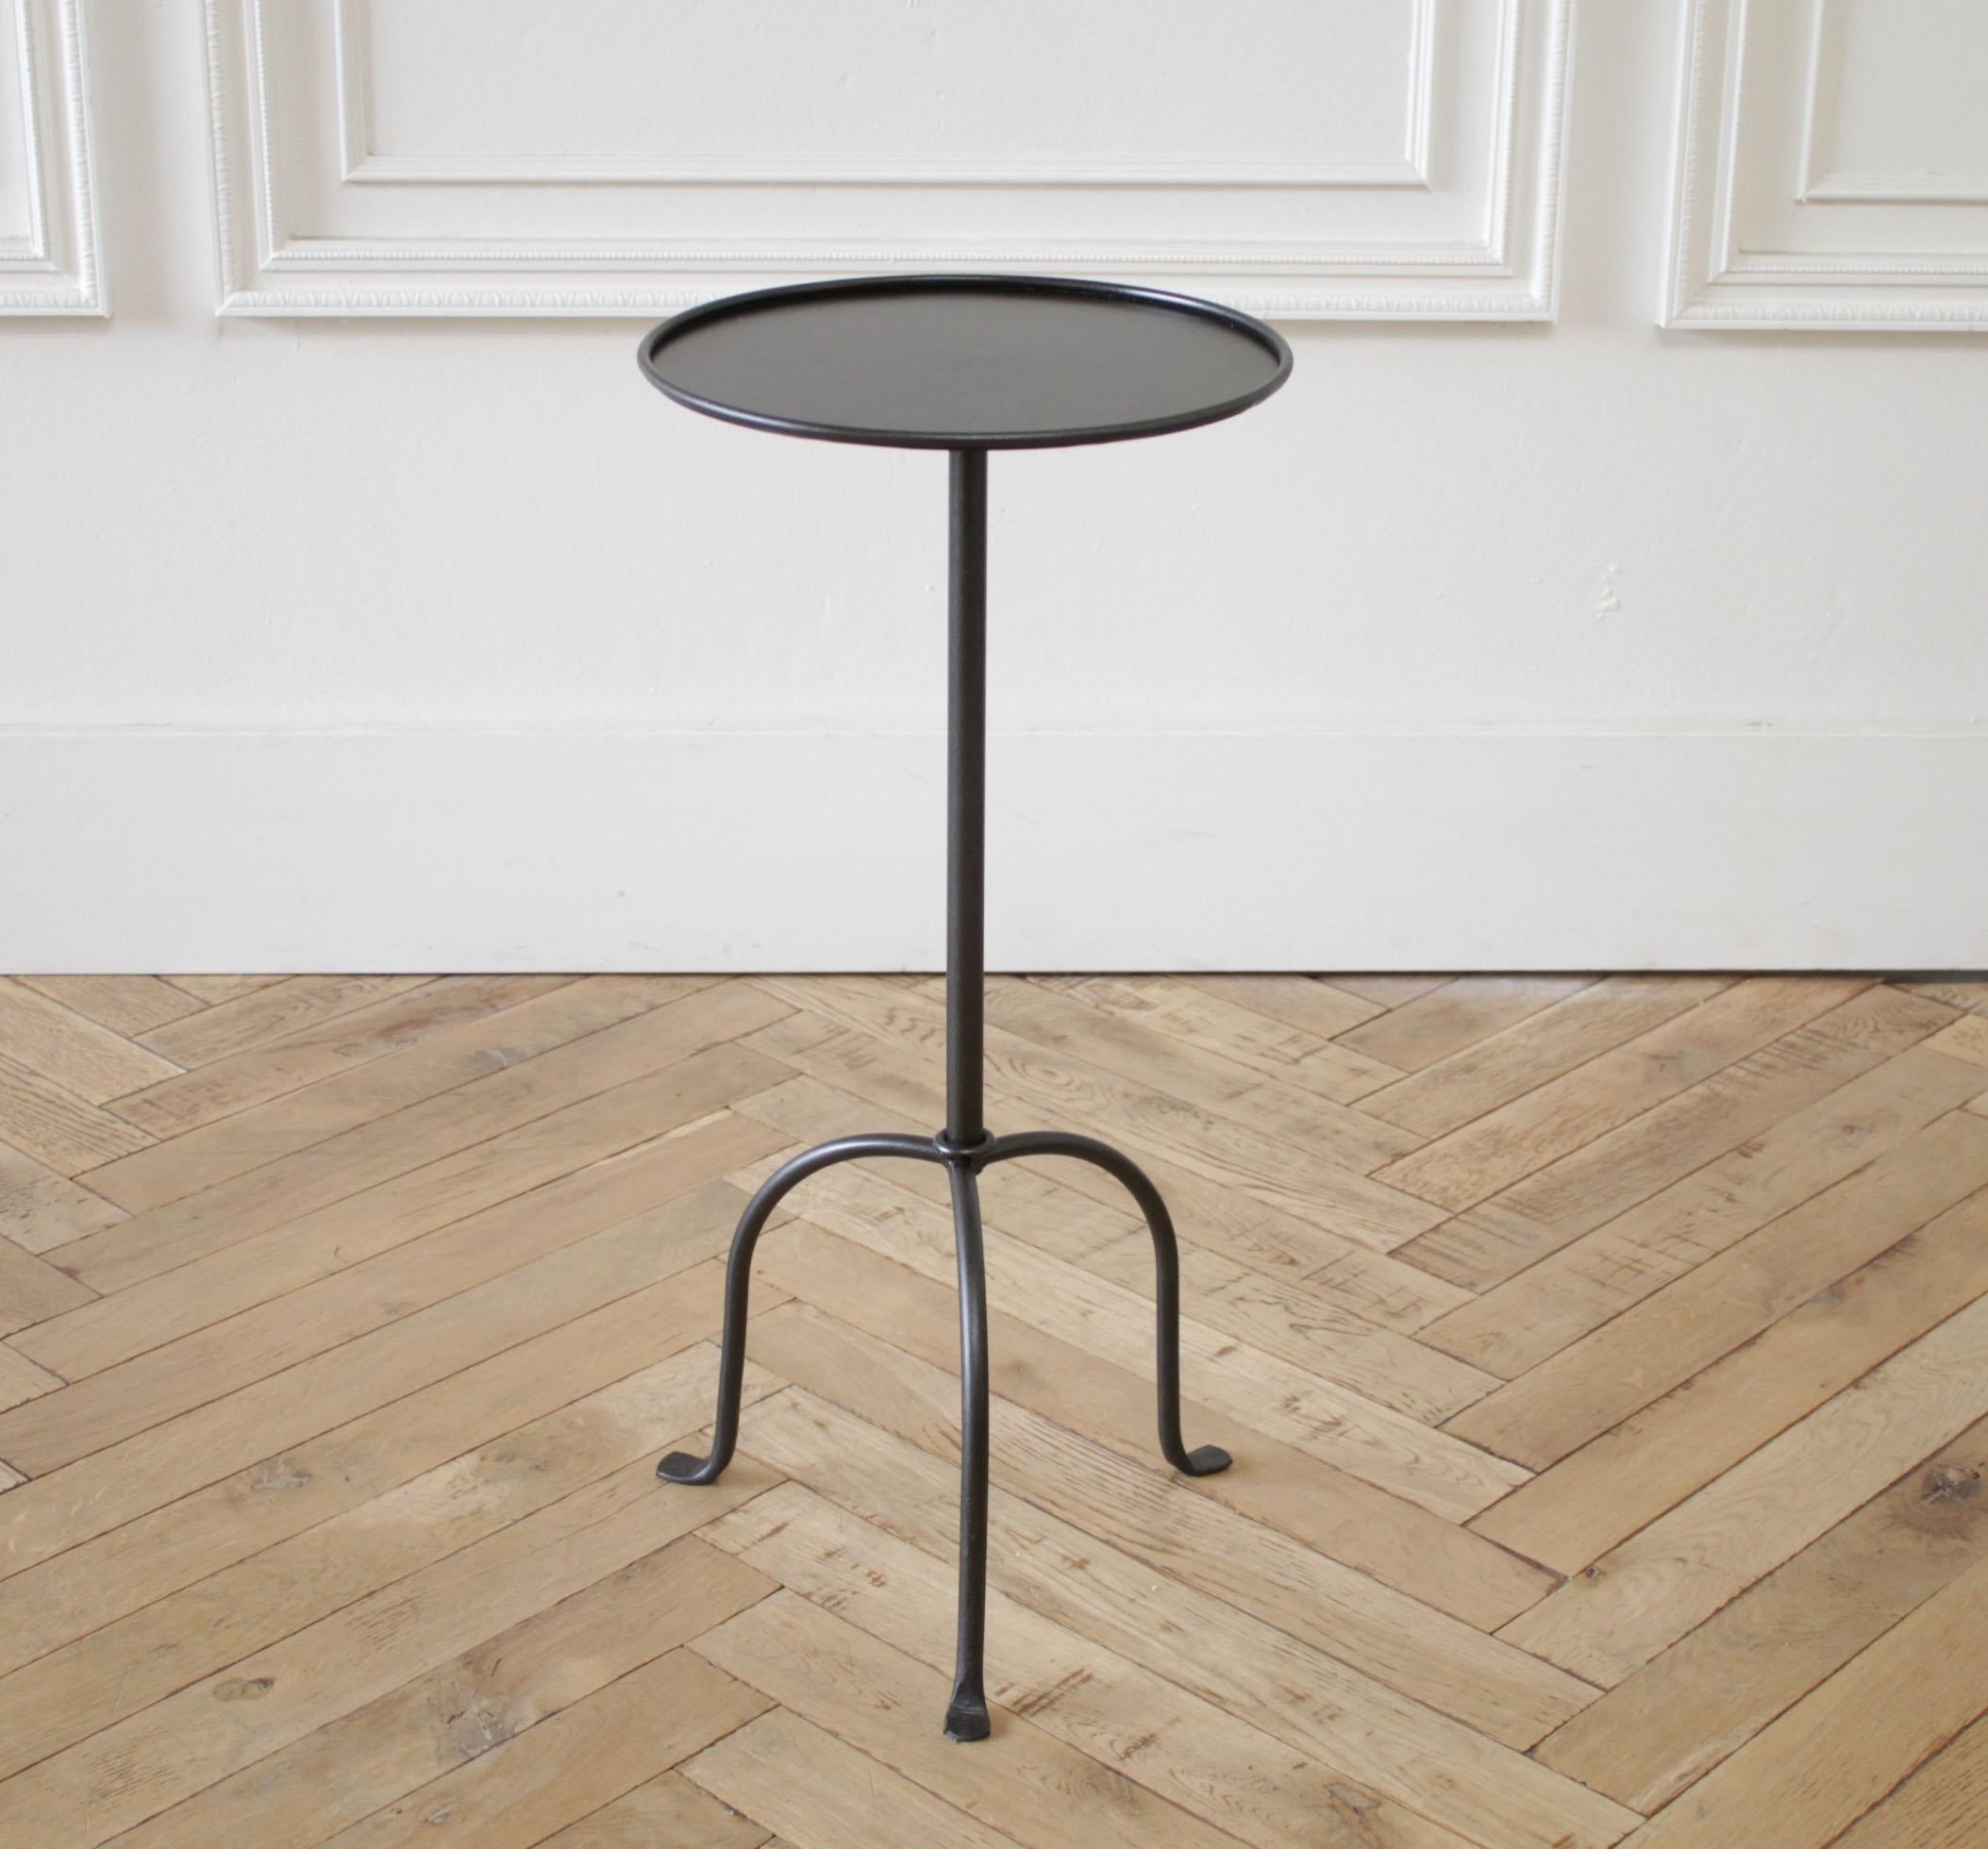 Lido tall iron drink table in iron finish or brass finish
Inspired by the antique version, this tall drink table is forged iron with a small round table top. Offered in either the dark iron finish, or antique brass colored finish.
Made in the USA,